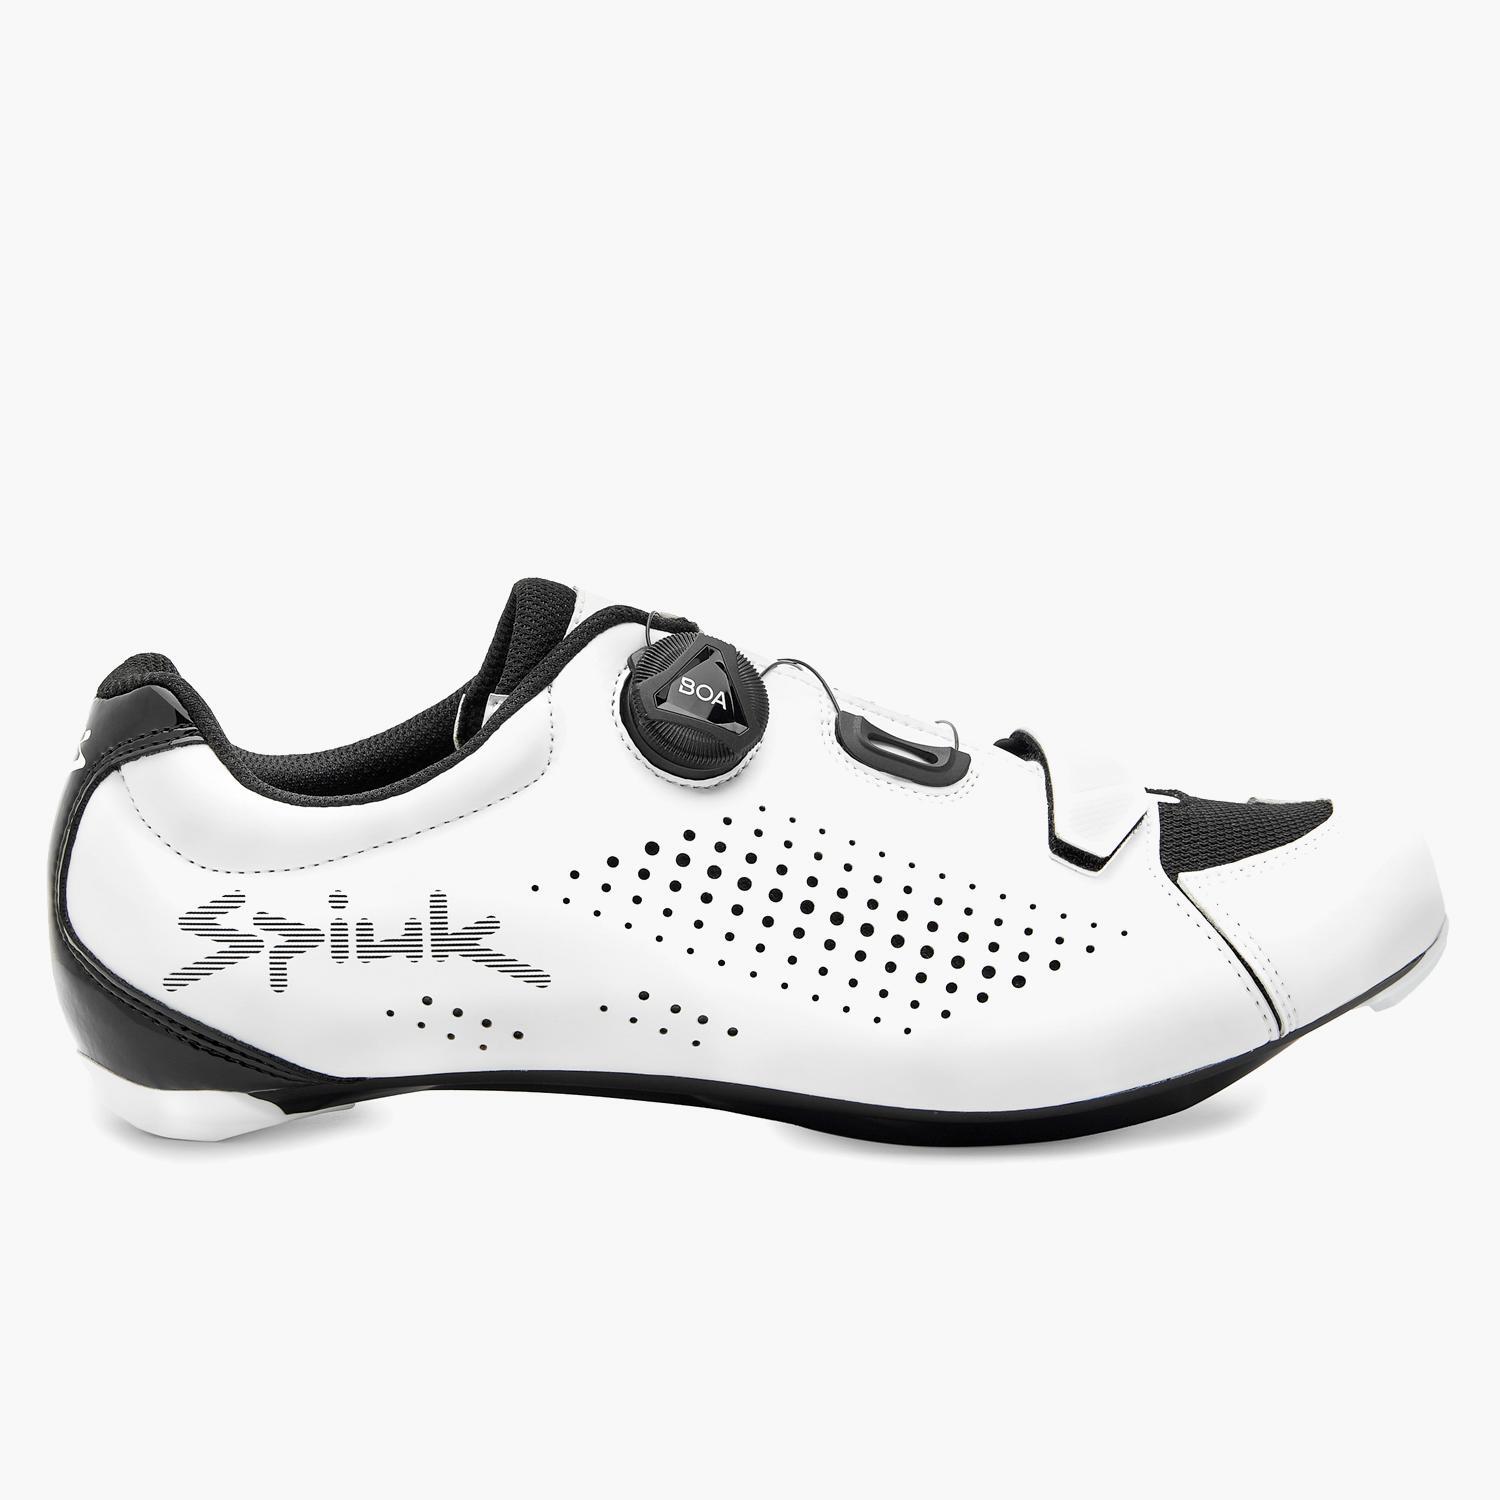 Spiuk Caray - Blanc - Chaussures Cyclisme Homme sports taille 43